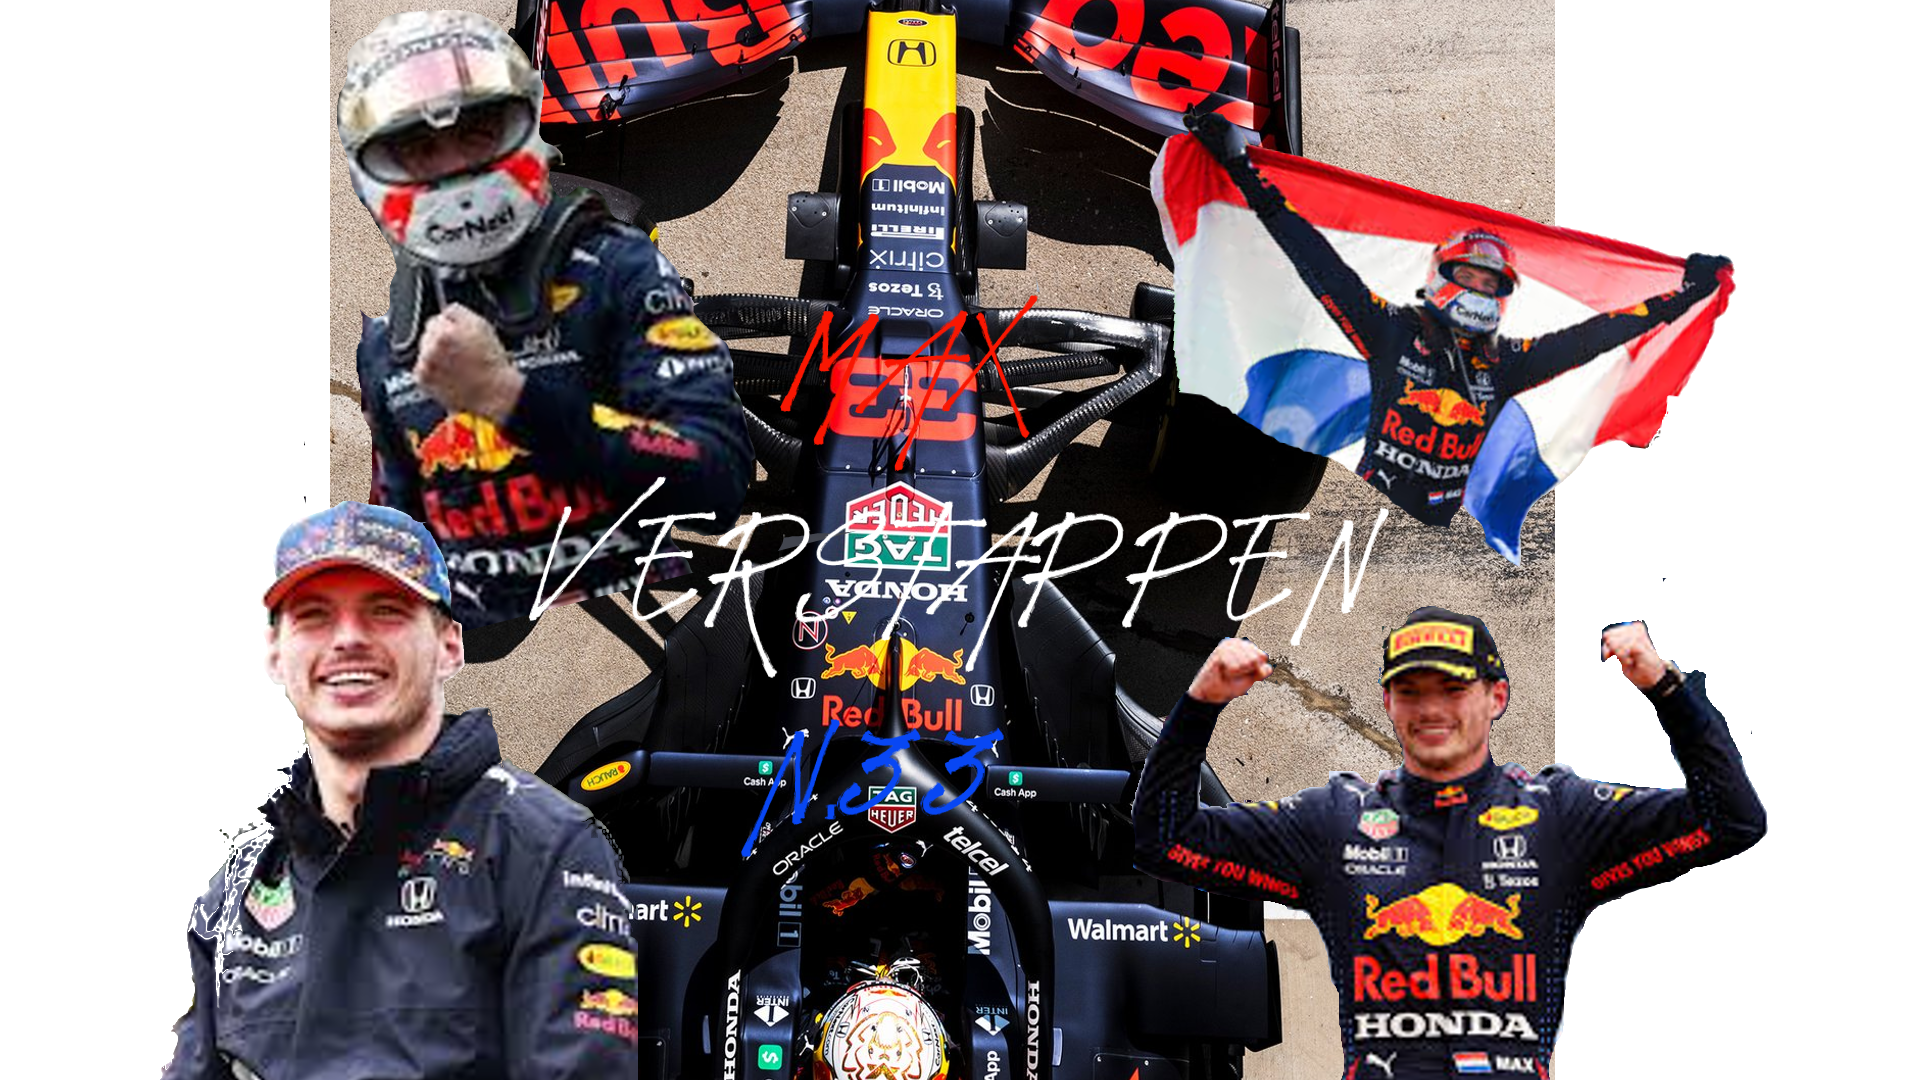 Max Verstappen Wallpaper I hope you like it, I can do any driver you want if you ask me